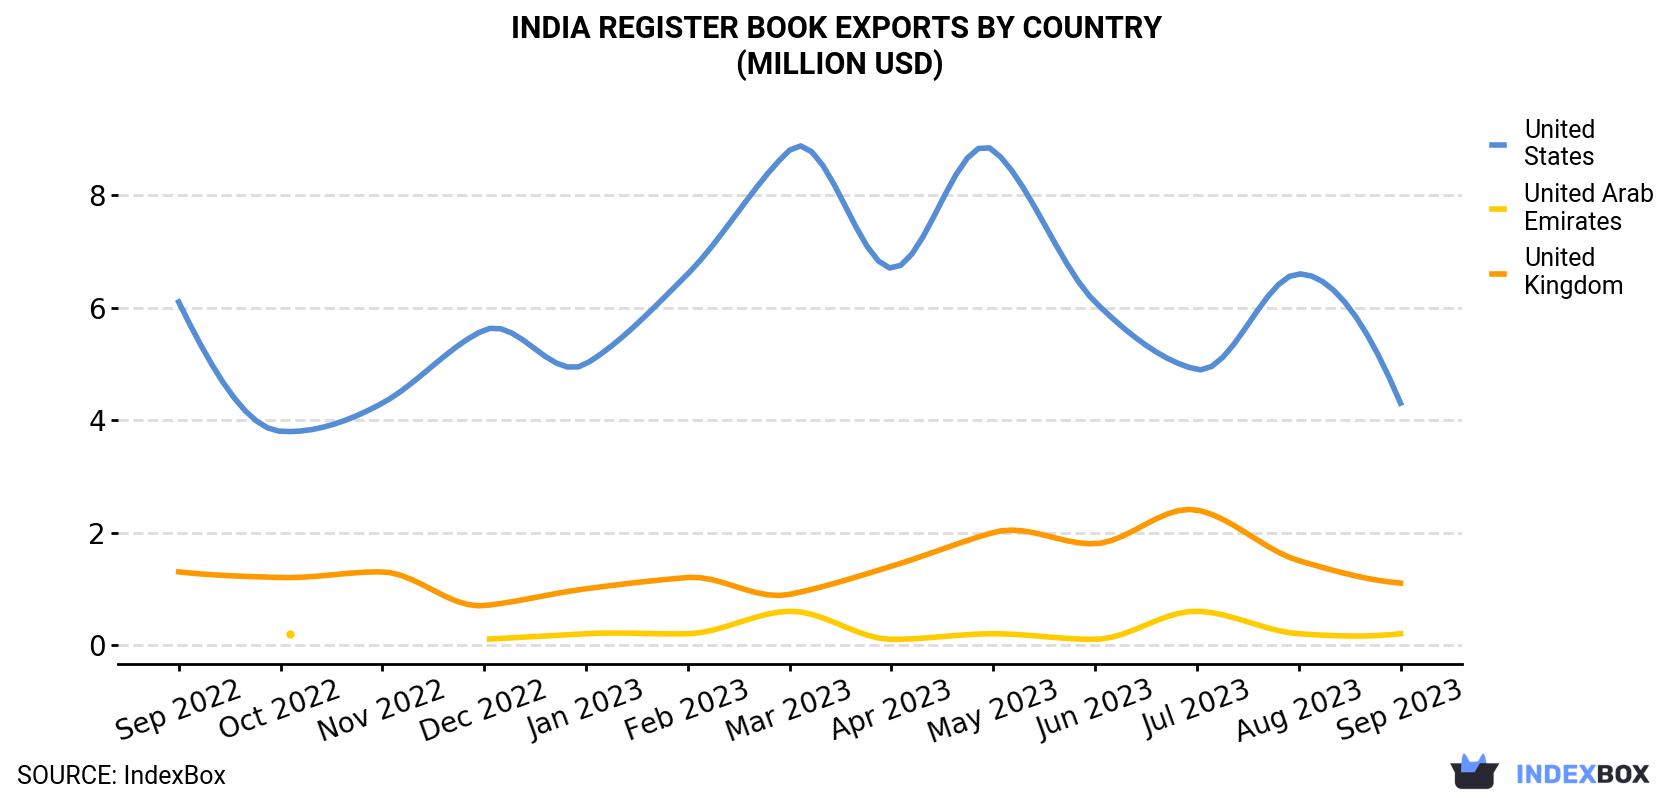 India Register Book Exports By Country (Million USD)